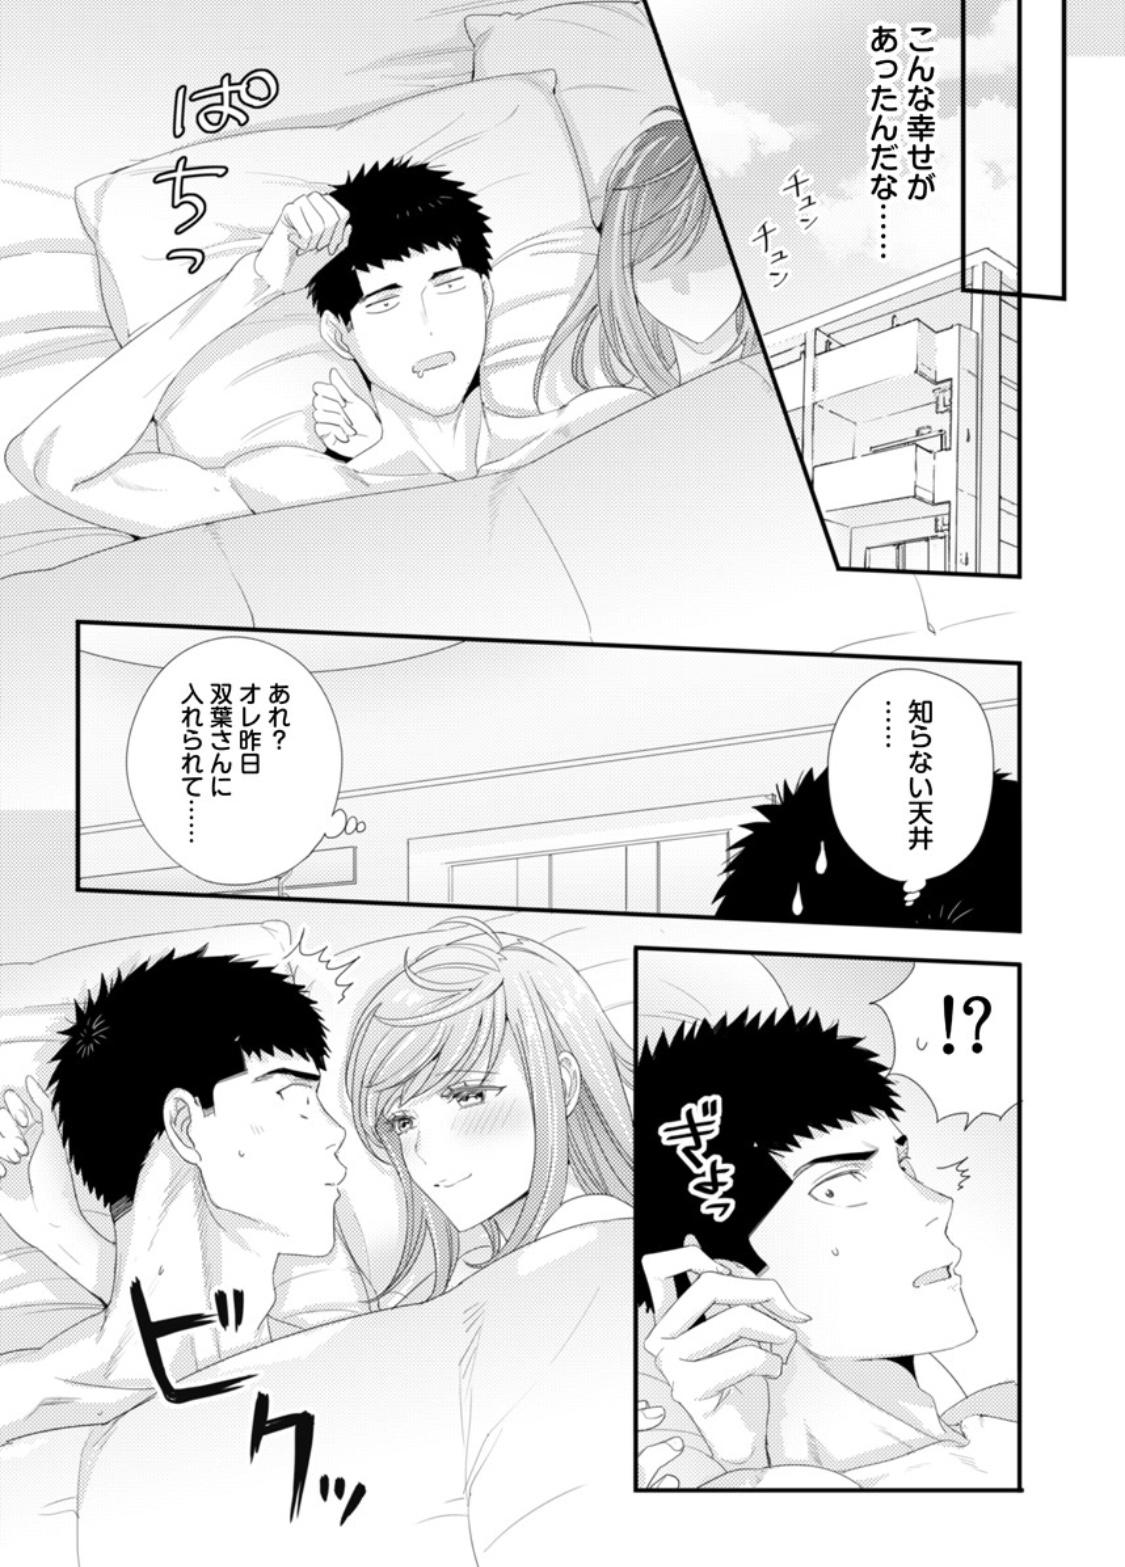 Please Let Me Hold You Futaba-San! Ch. 1-4 62